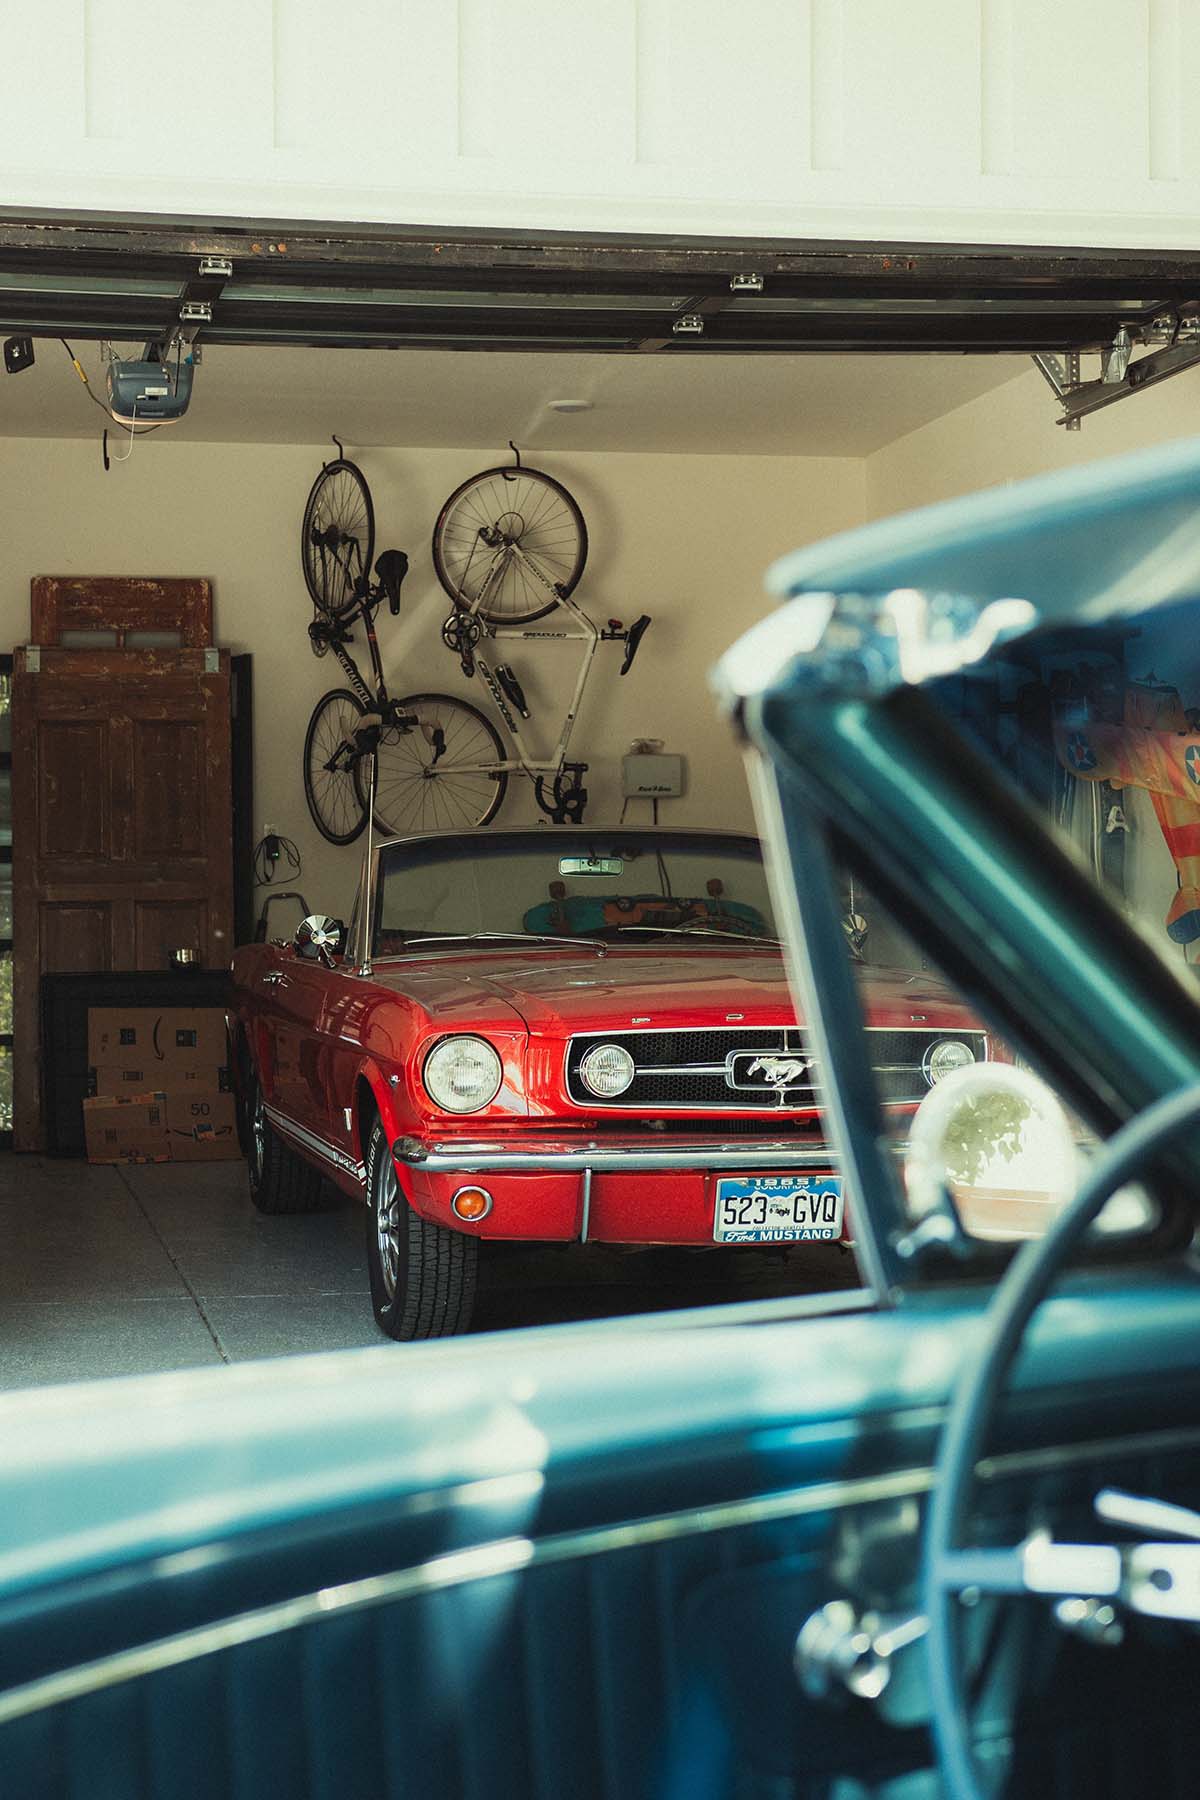 Clean garage with vintage Shelby Mustang parked.